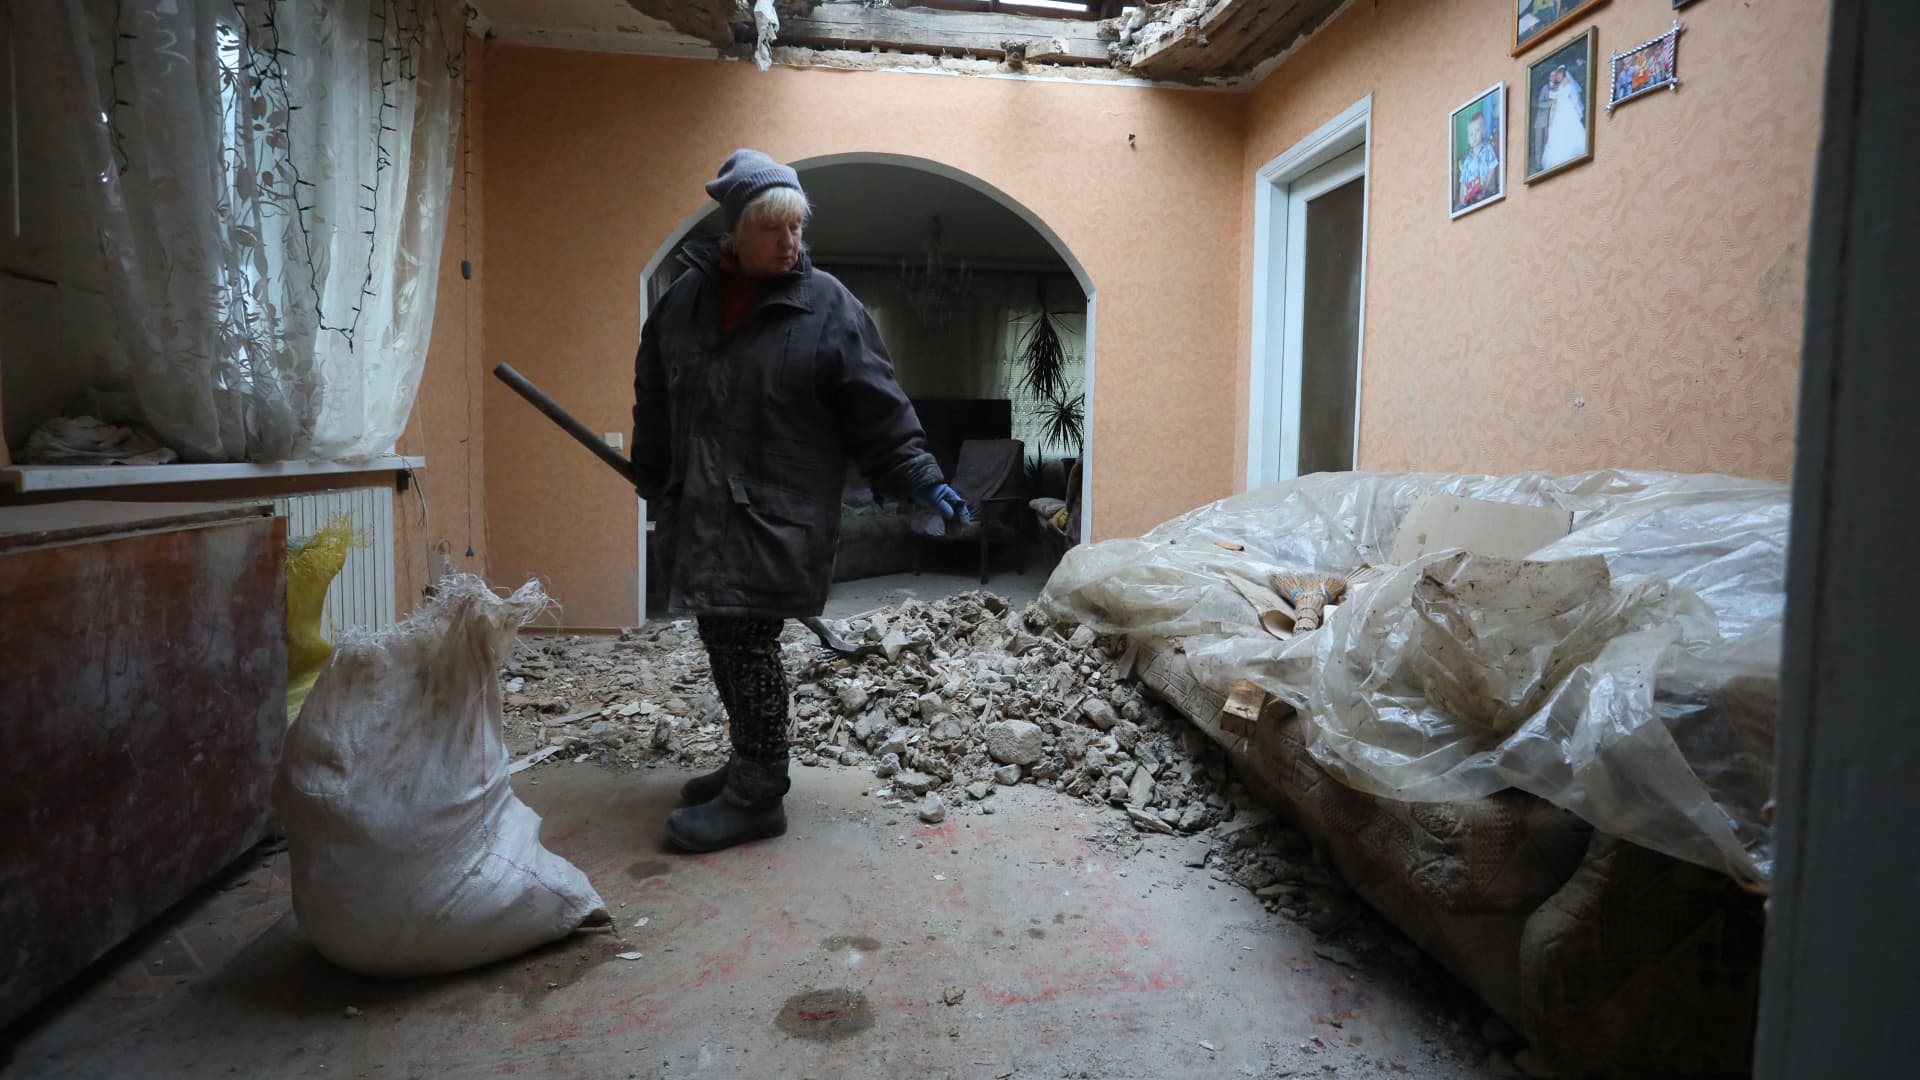 A local resident of the Ukrainian-controlled village of Stanytsia Luhanska, Luhansk region, cleans up debris from her home after the shelling by Russia-Backed separatists on February 18, 2022.